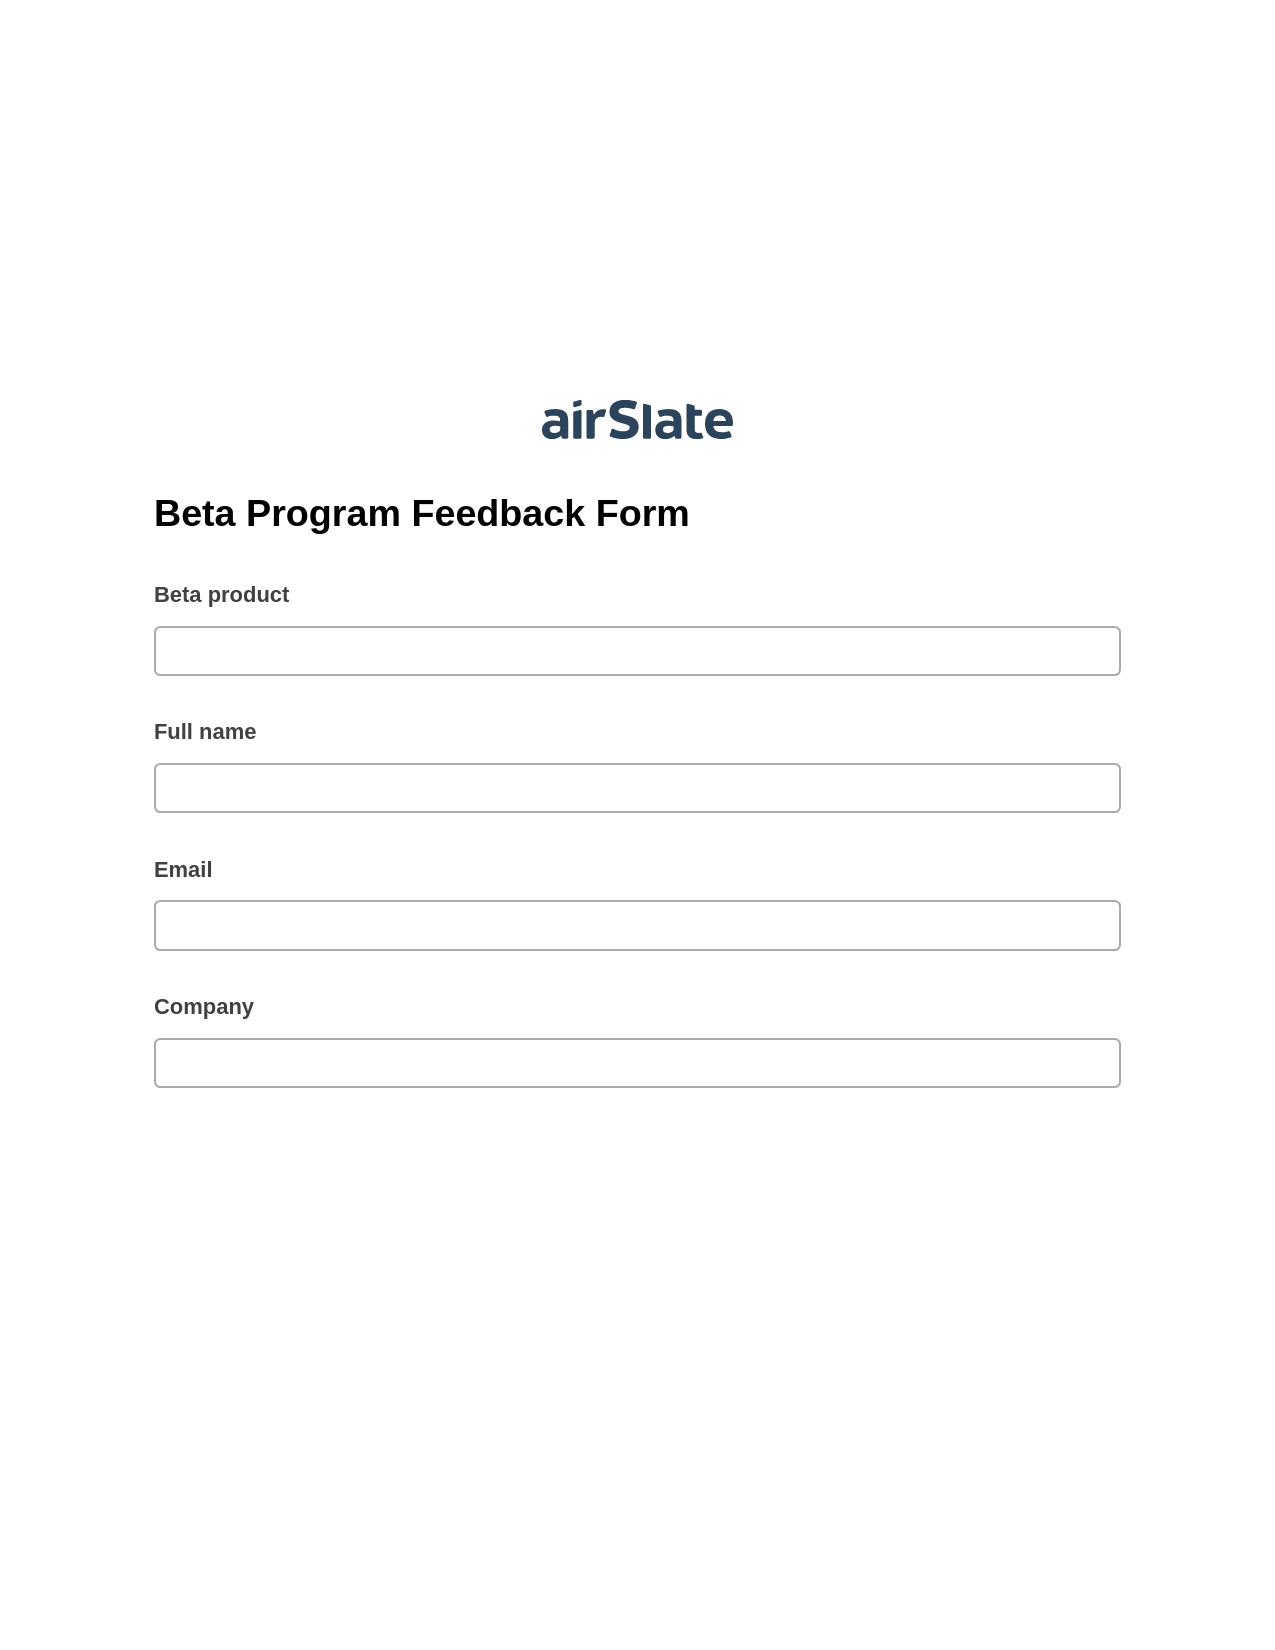 Multirole Beta Program Feedback Form Pre-fill from CSV File Bot, Unassign Role Bot, OneDrive Bot